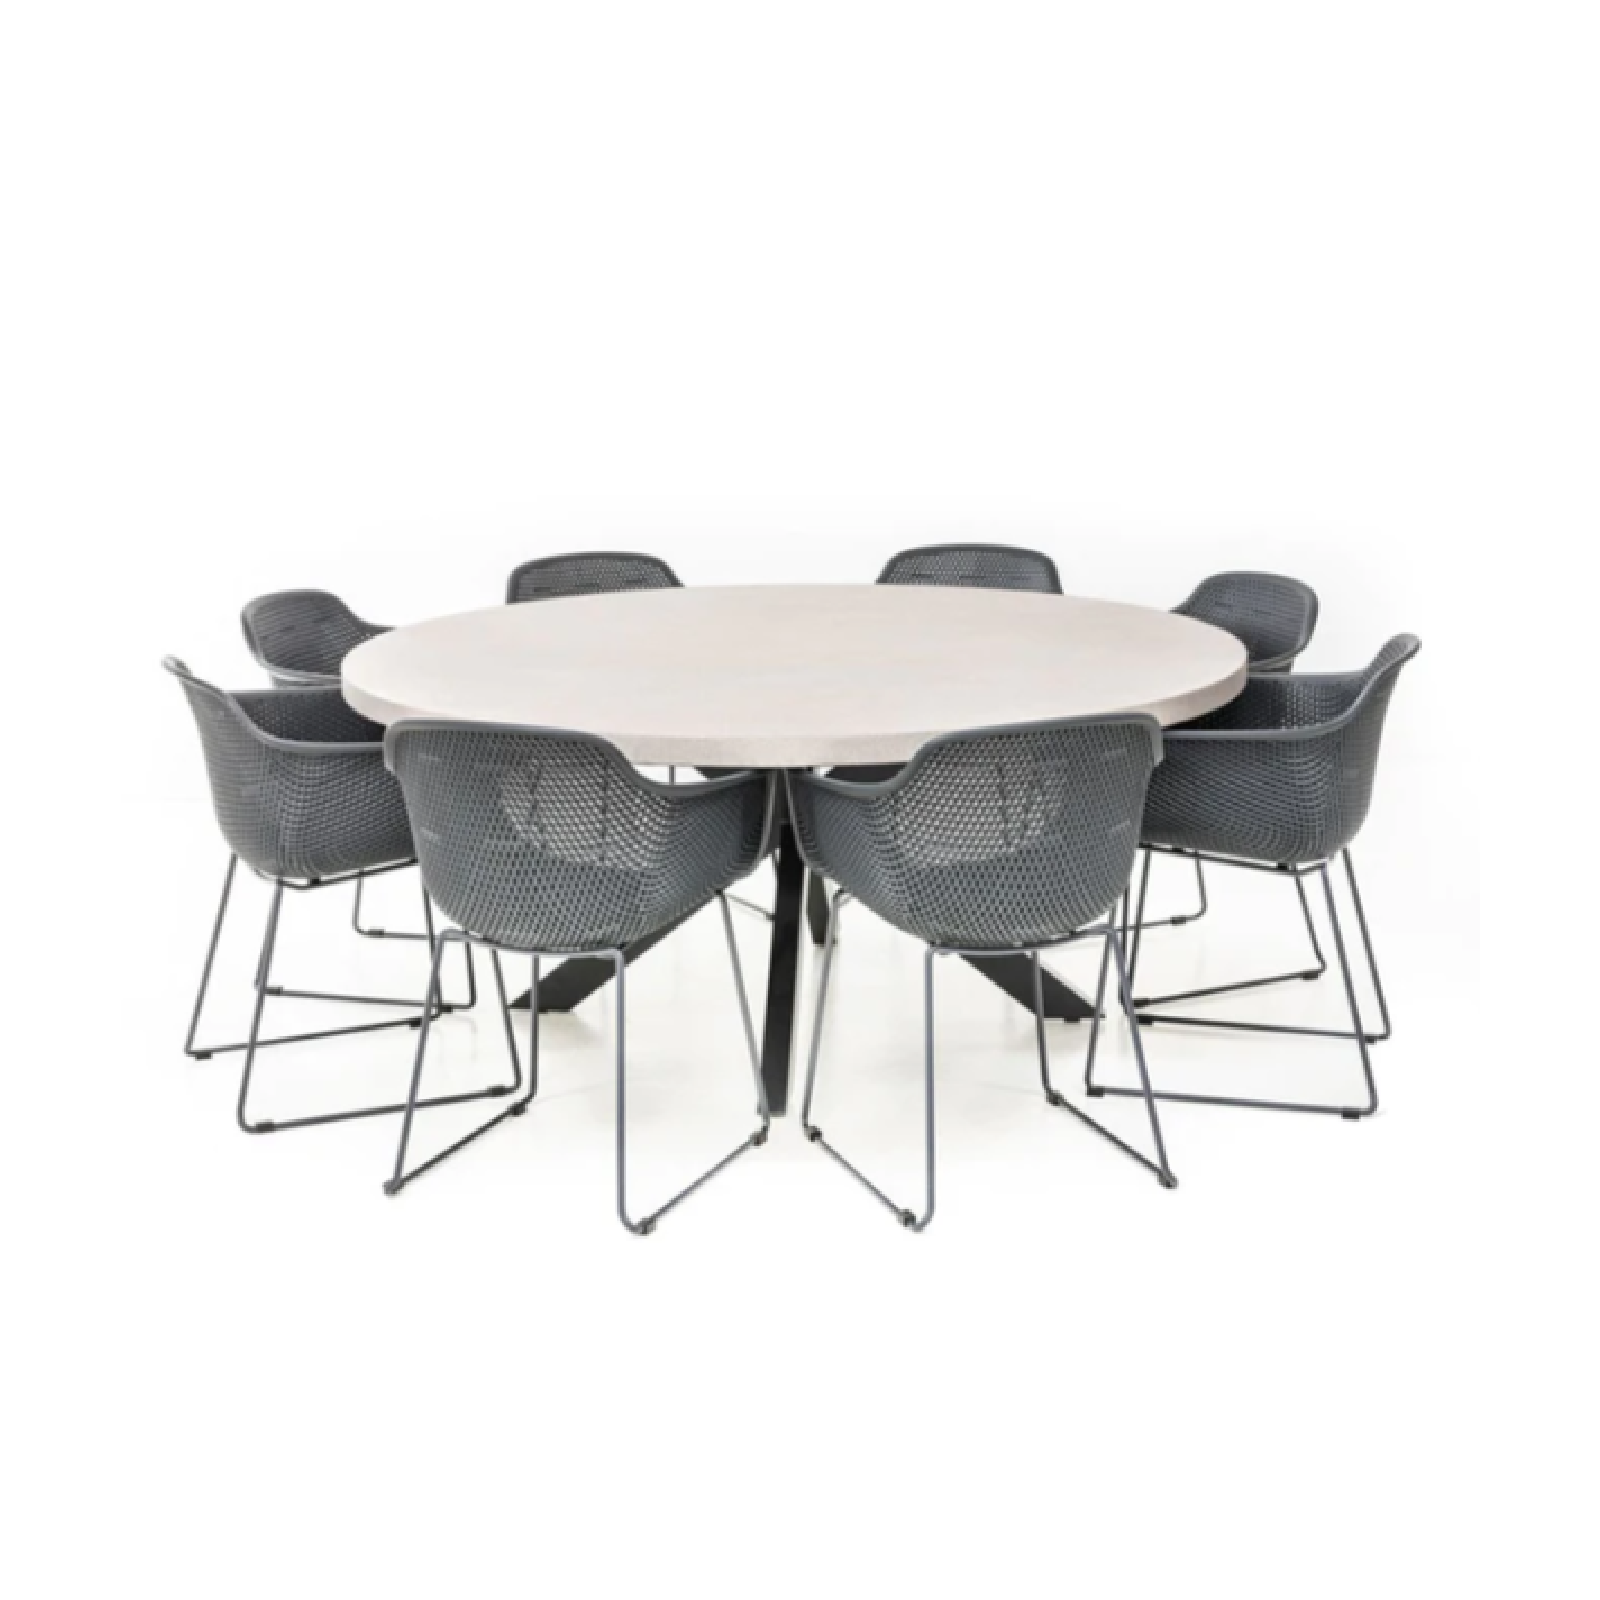 Excalibur Chelsea Round Dining Table with Lilac Chairs